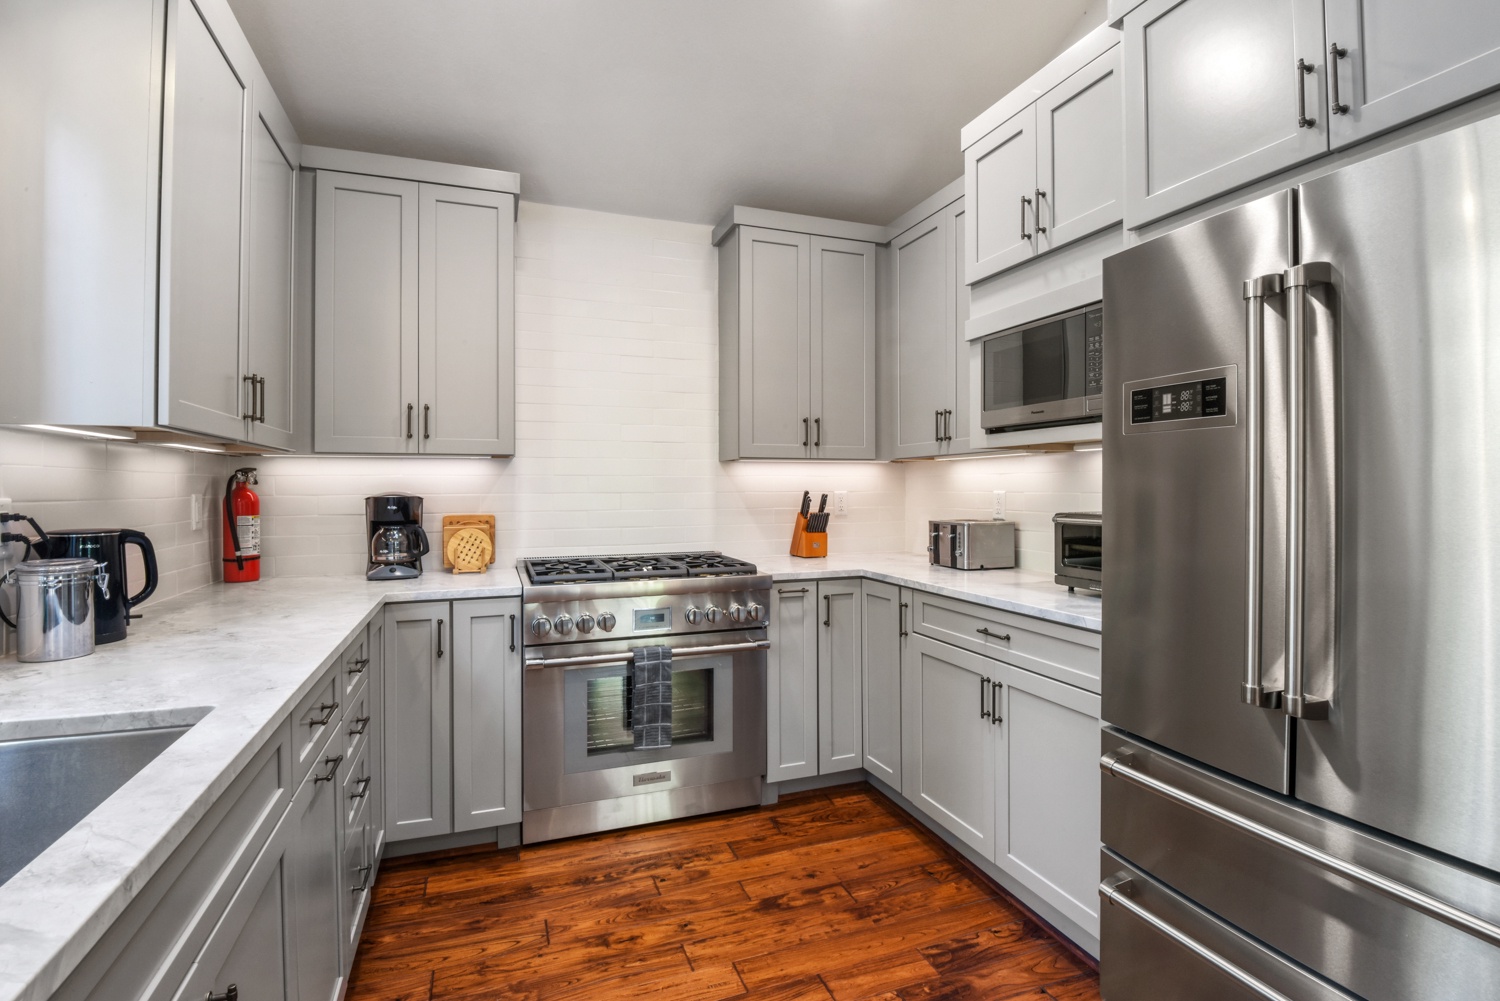 Full kitchen with stainless-steel appliances